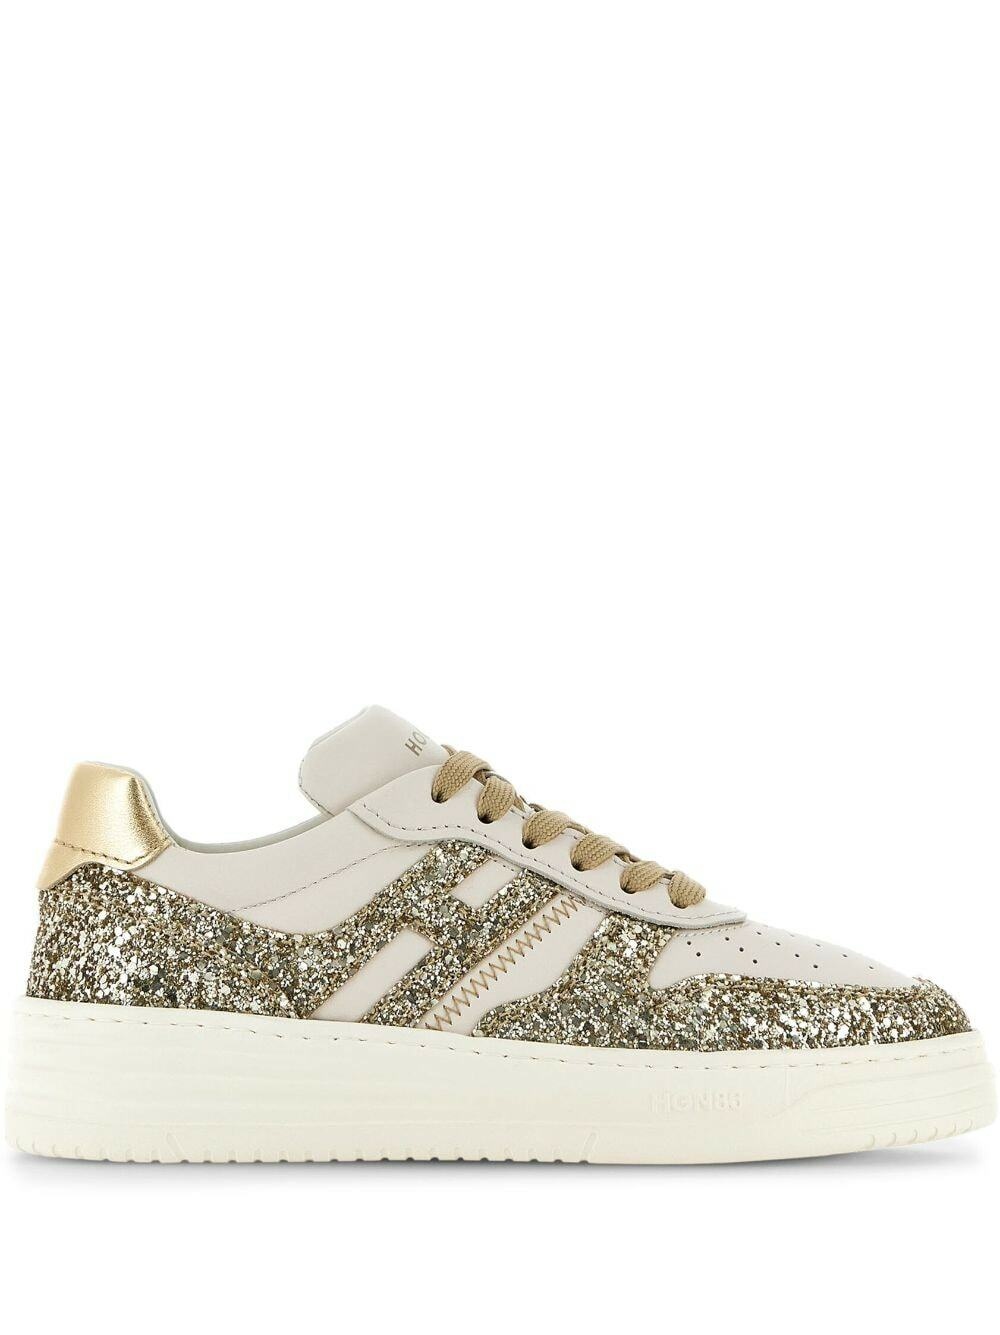 HOGAN - H630 Leather And Glitter Sneakers Hogan